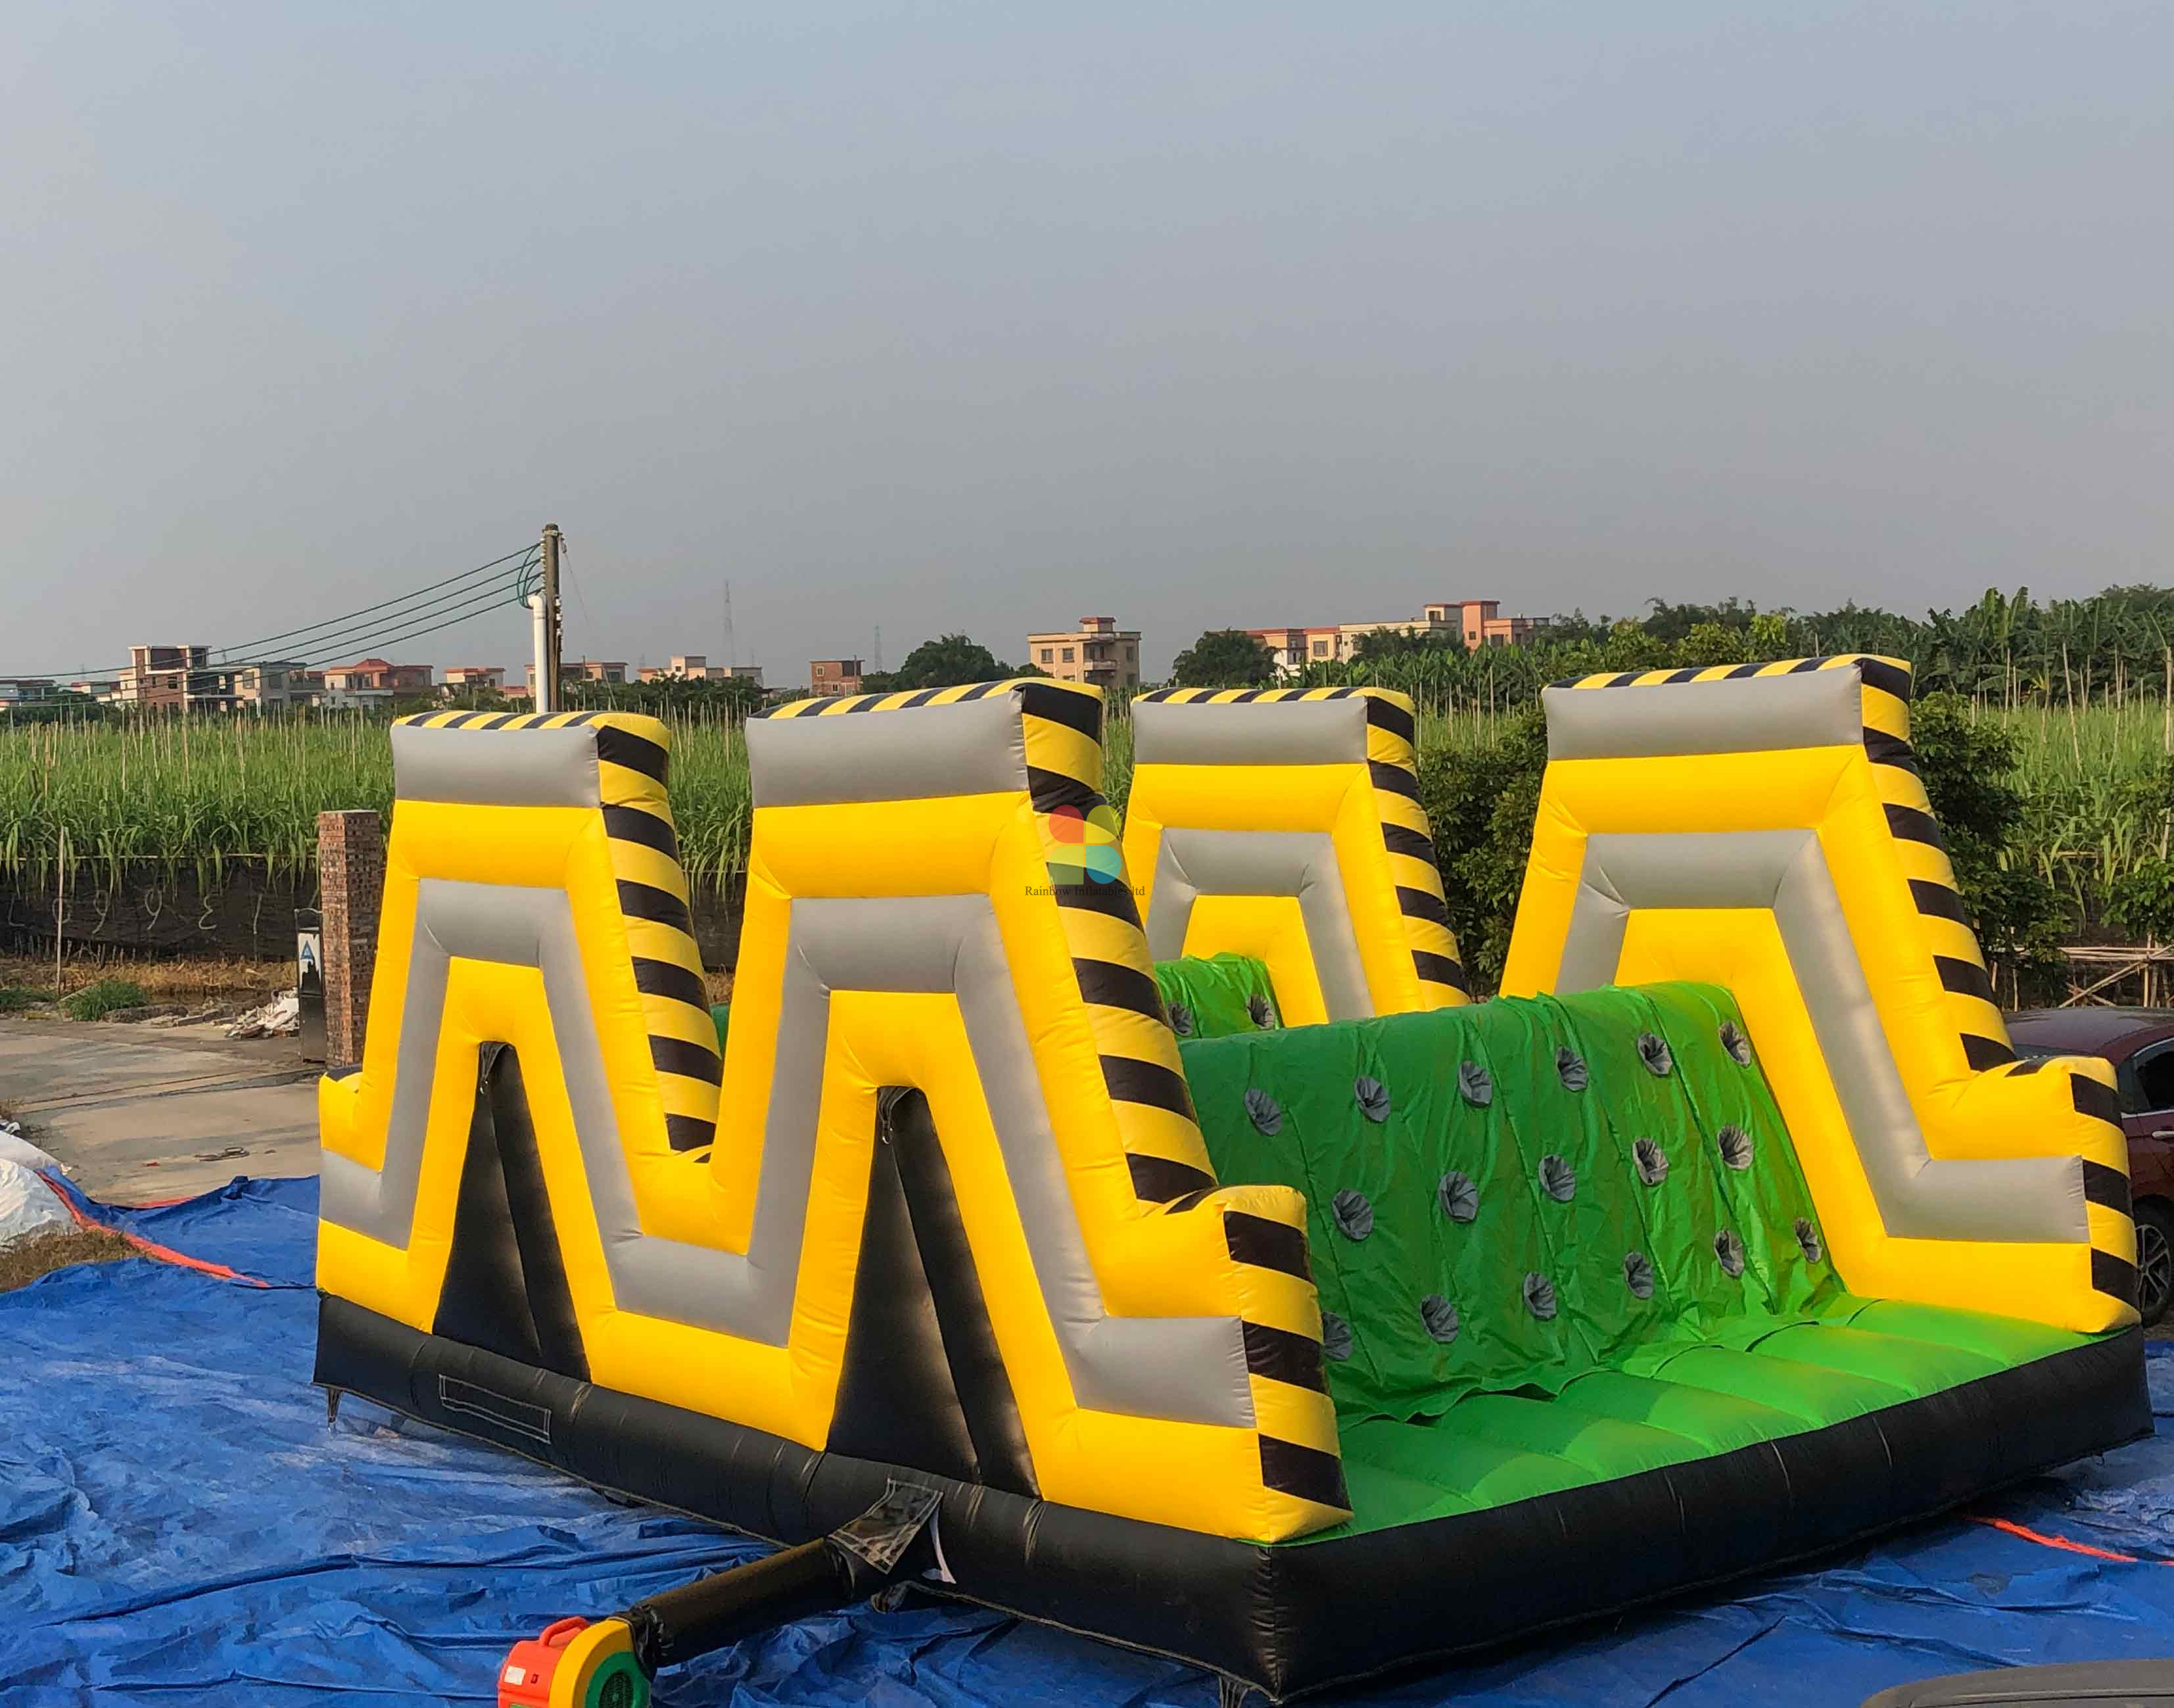 MELTDOWN COLORED 5K INFLATABLES STORM THE WALLS